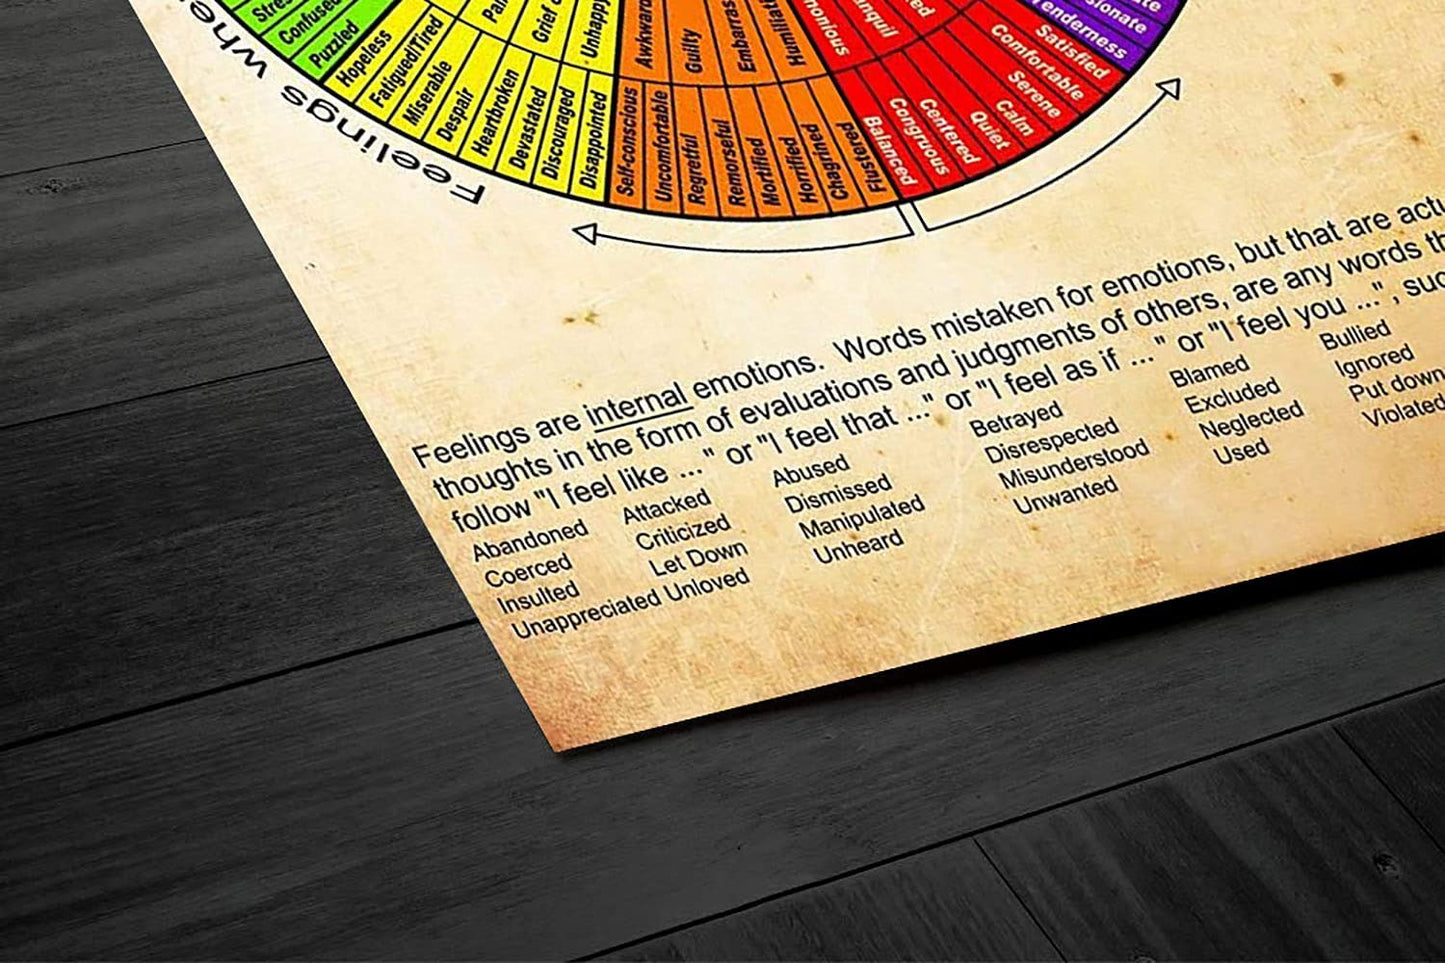 Feeling Wheel Chart, Educational Classroom Poster for Counseling Room Decor - BEAWART